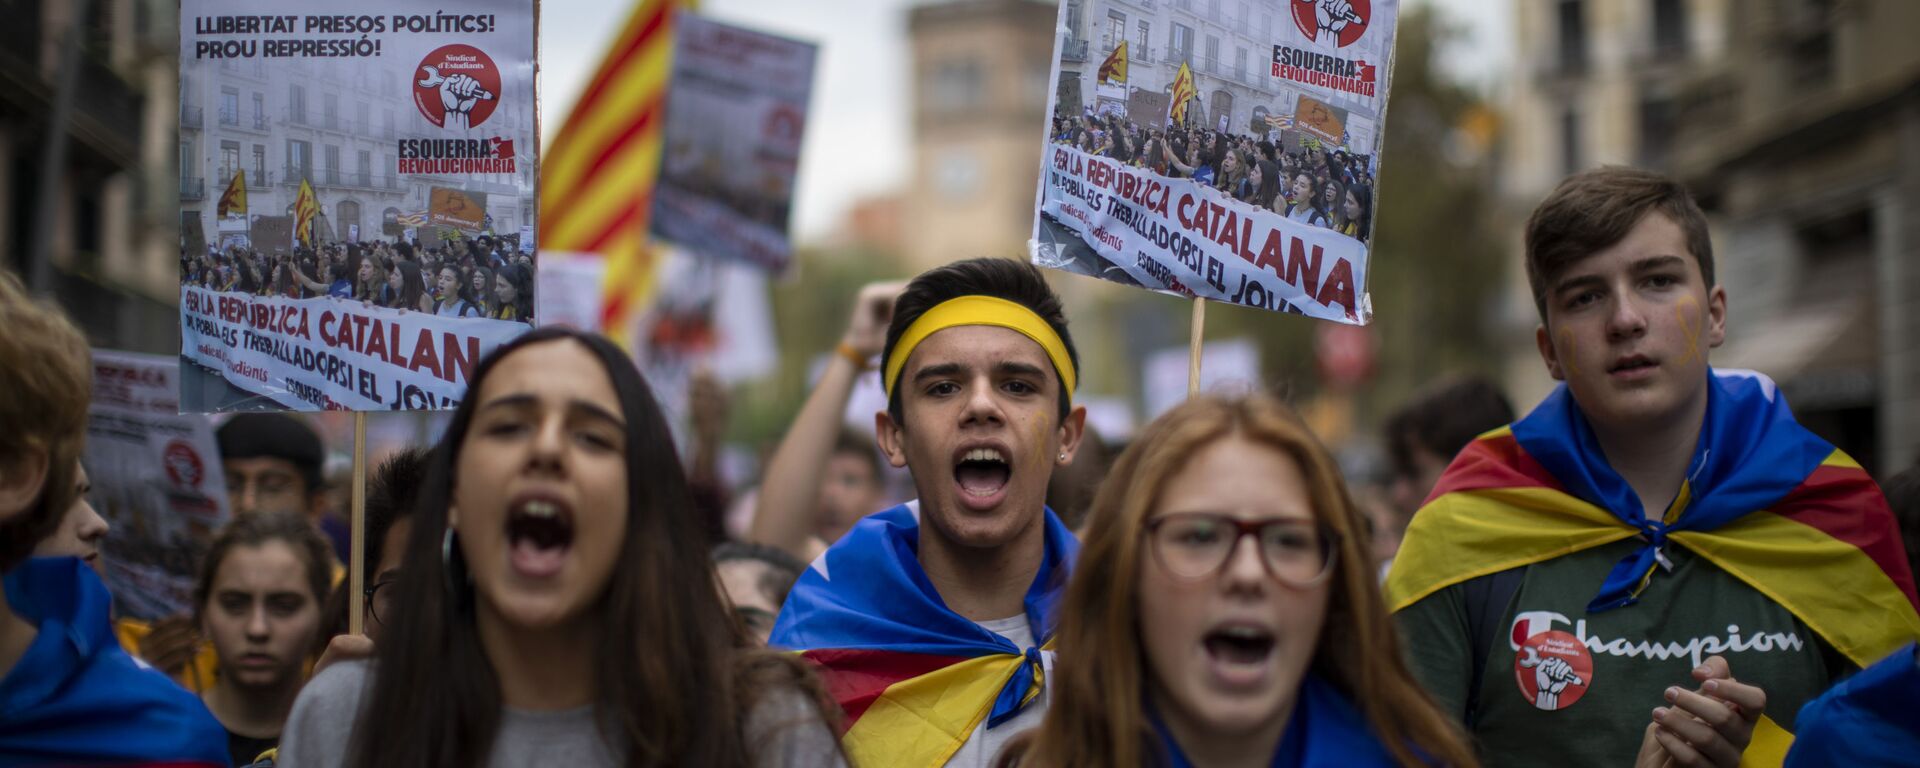 Students protest during a demonstration in Barcelona, Spain, Thursday, Oct. 31, 2019. Hundreds of young people decided to set up camp after Spain's Supreme Court convicted 12 separatist leaders of illegally promoting Catalonia region's independence and sentenced nine of them to prison. - Sputnik International, 1920, 20.01.2020